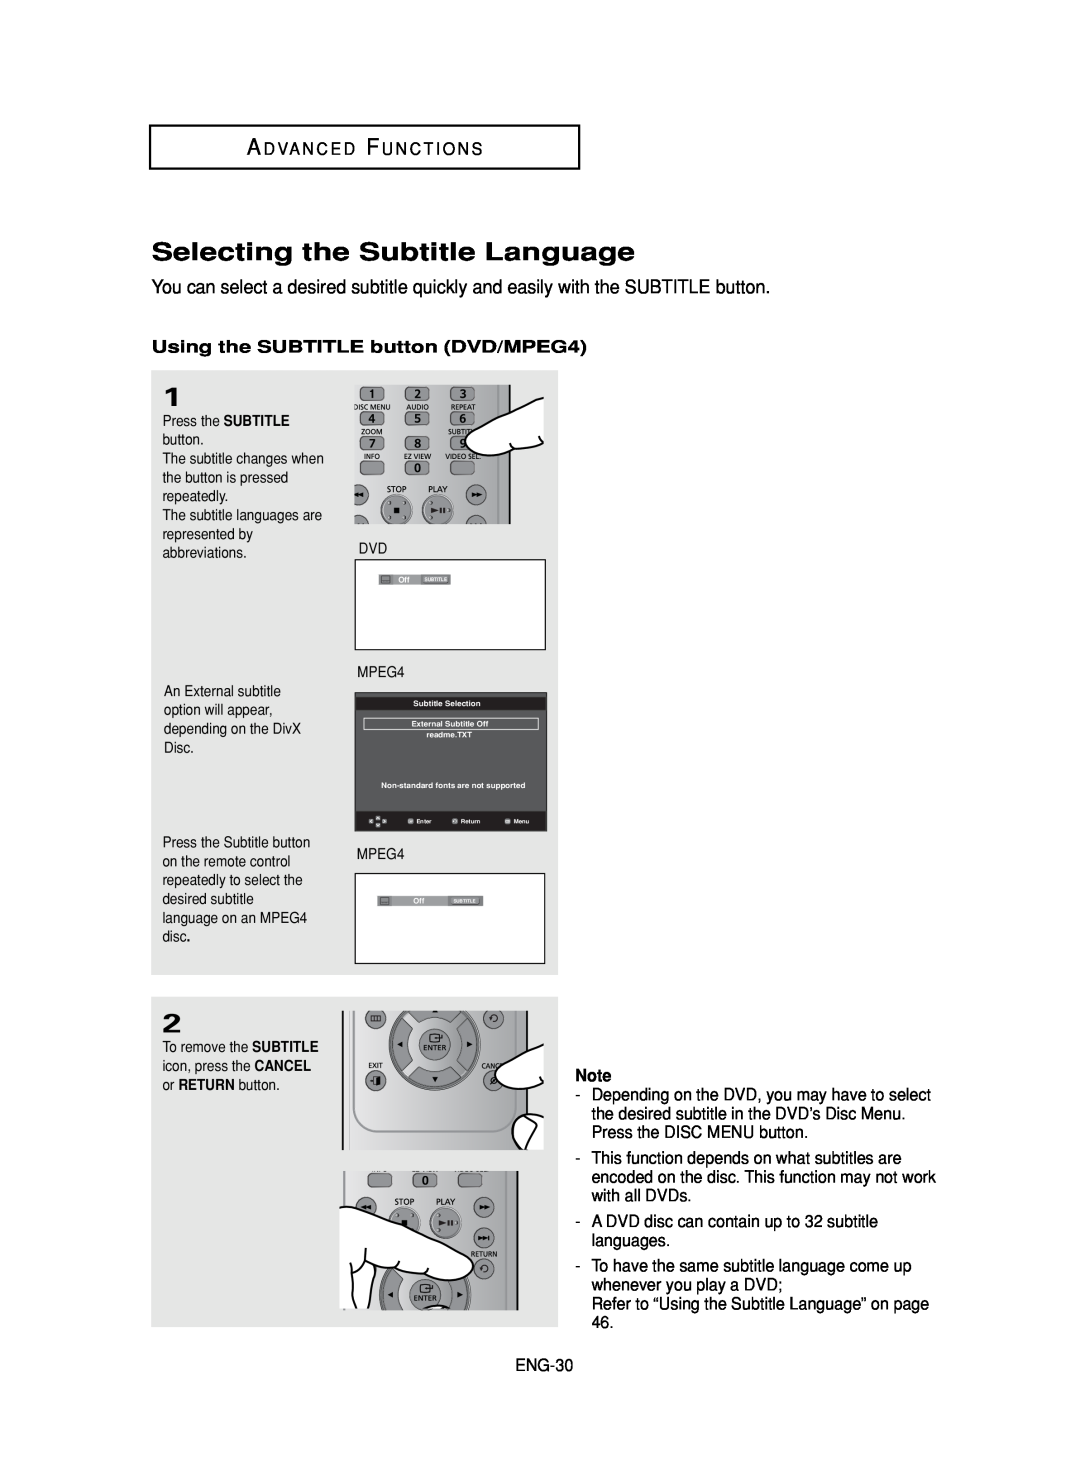 Samsung DVD-FP580, DVD-F1080 manual Selecting the Subtitle Language, Using the SUBTITLE button DVD/MPEG4 